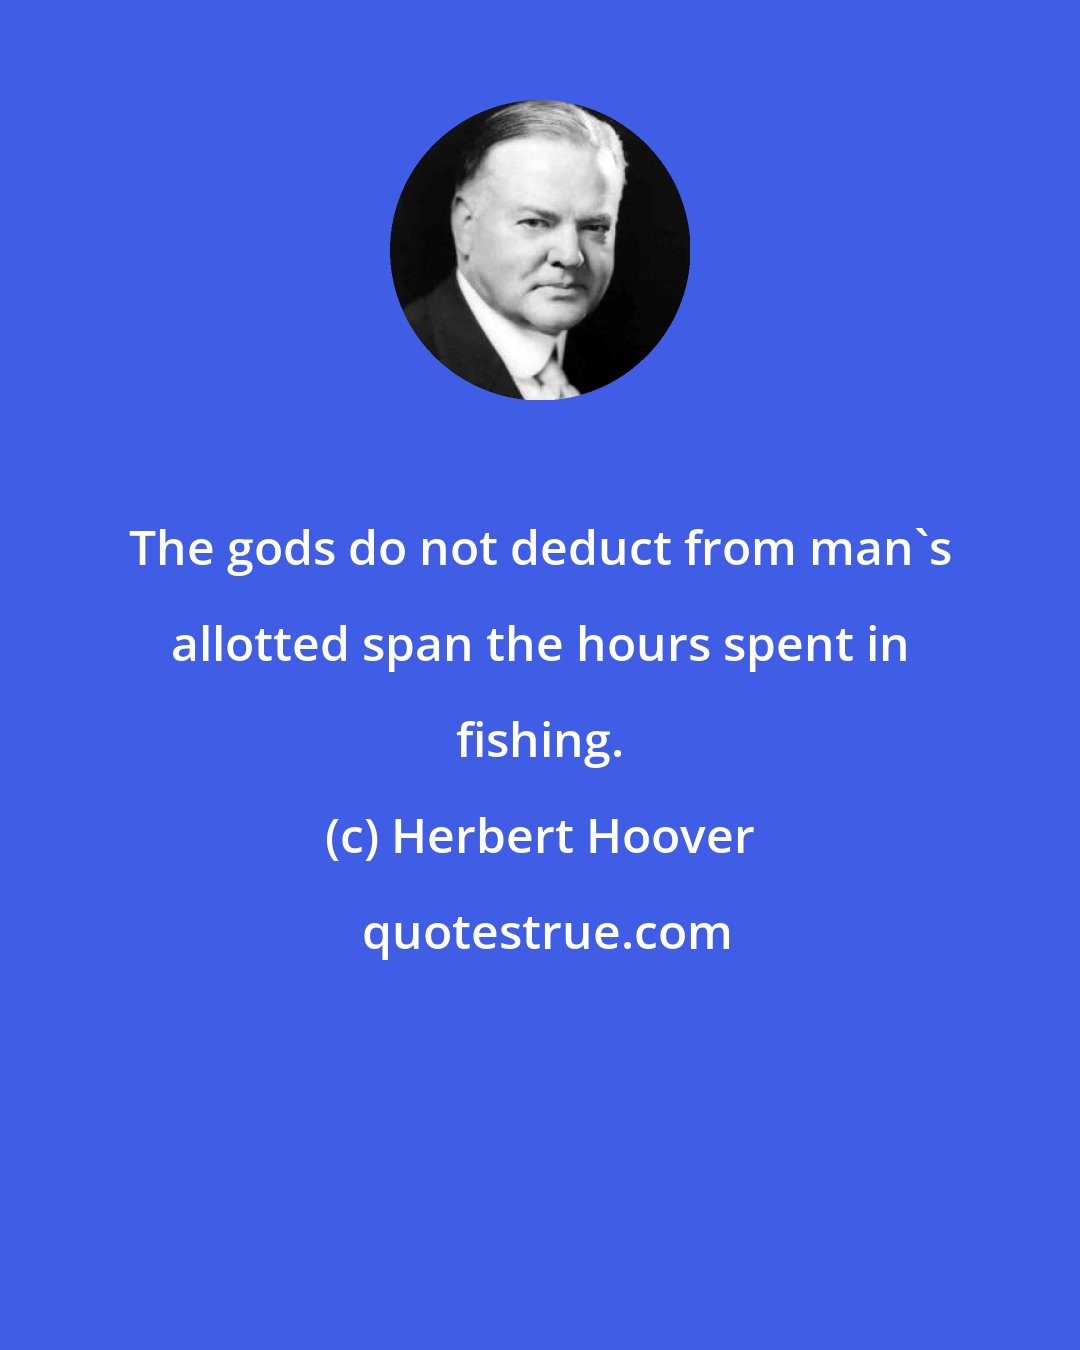 Herbert Hoover: The gods do not deduct from man's allotted span the hours spent in fishing.